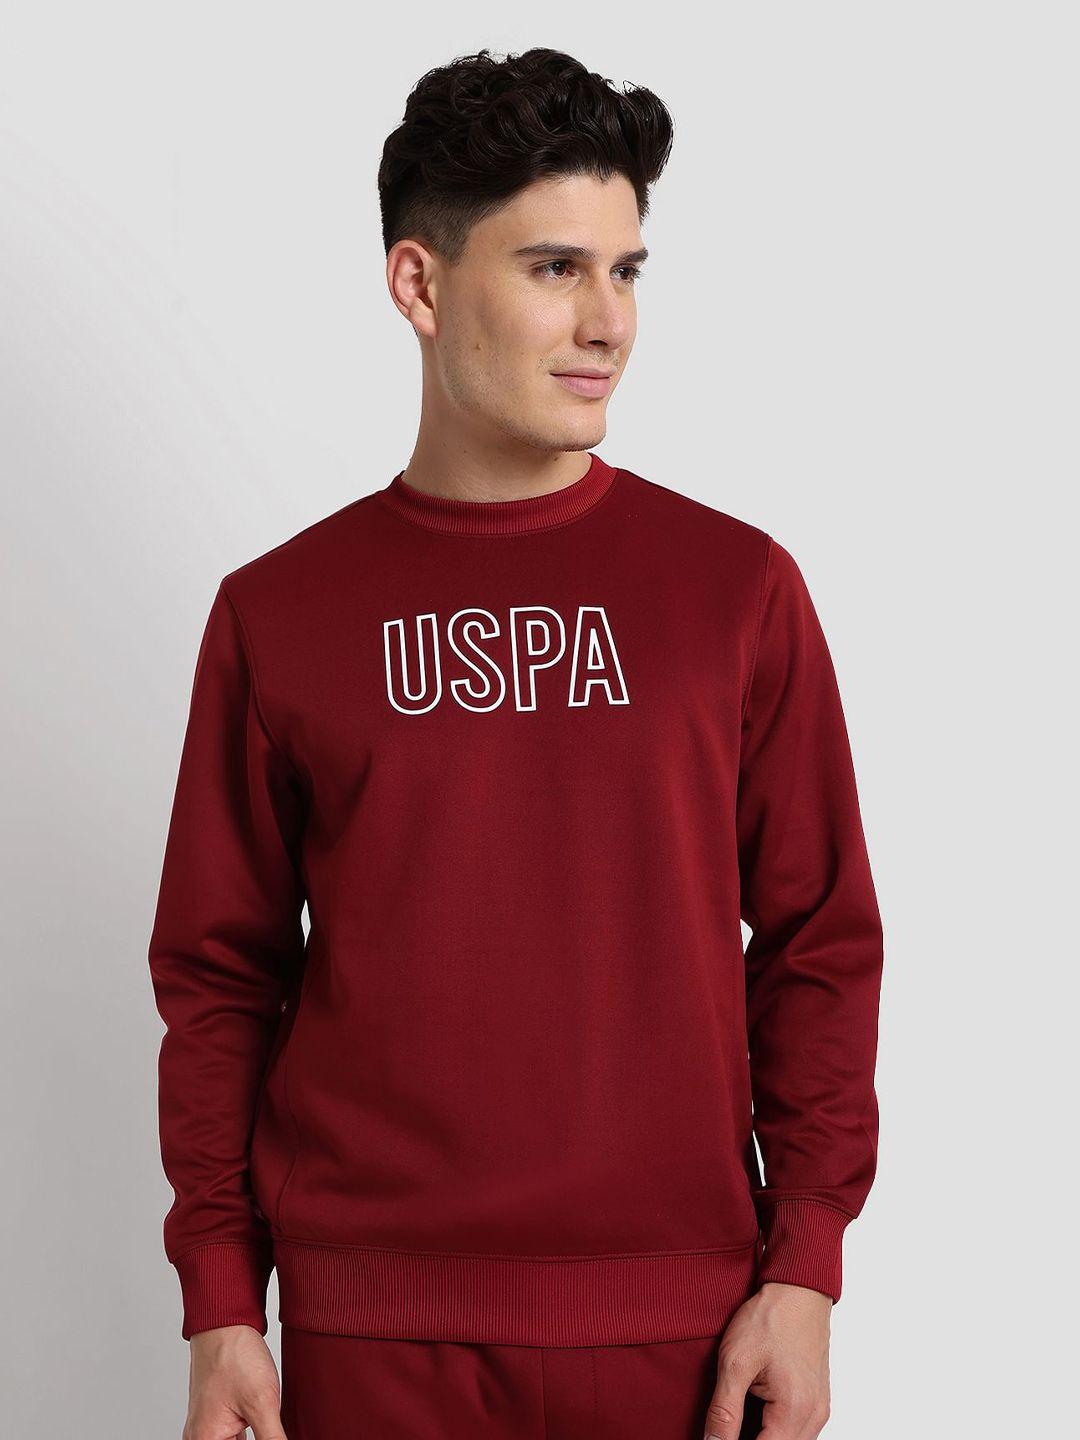 u.s. polo assn. printed round neck outline logo active pullover sweatshirt